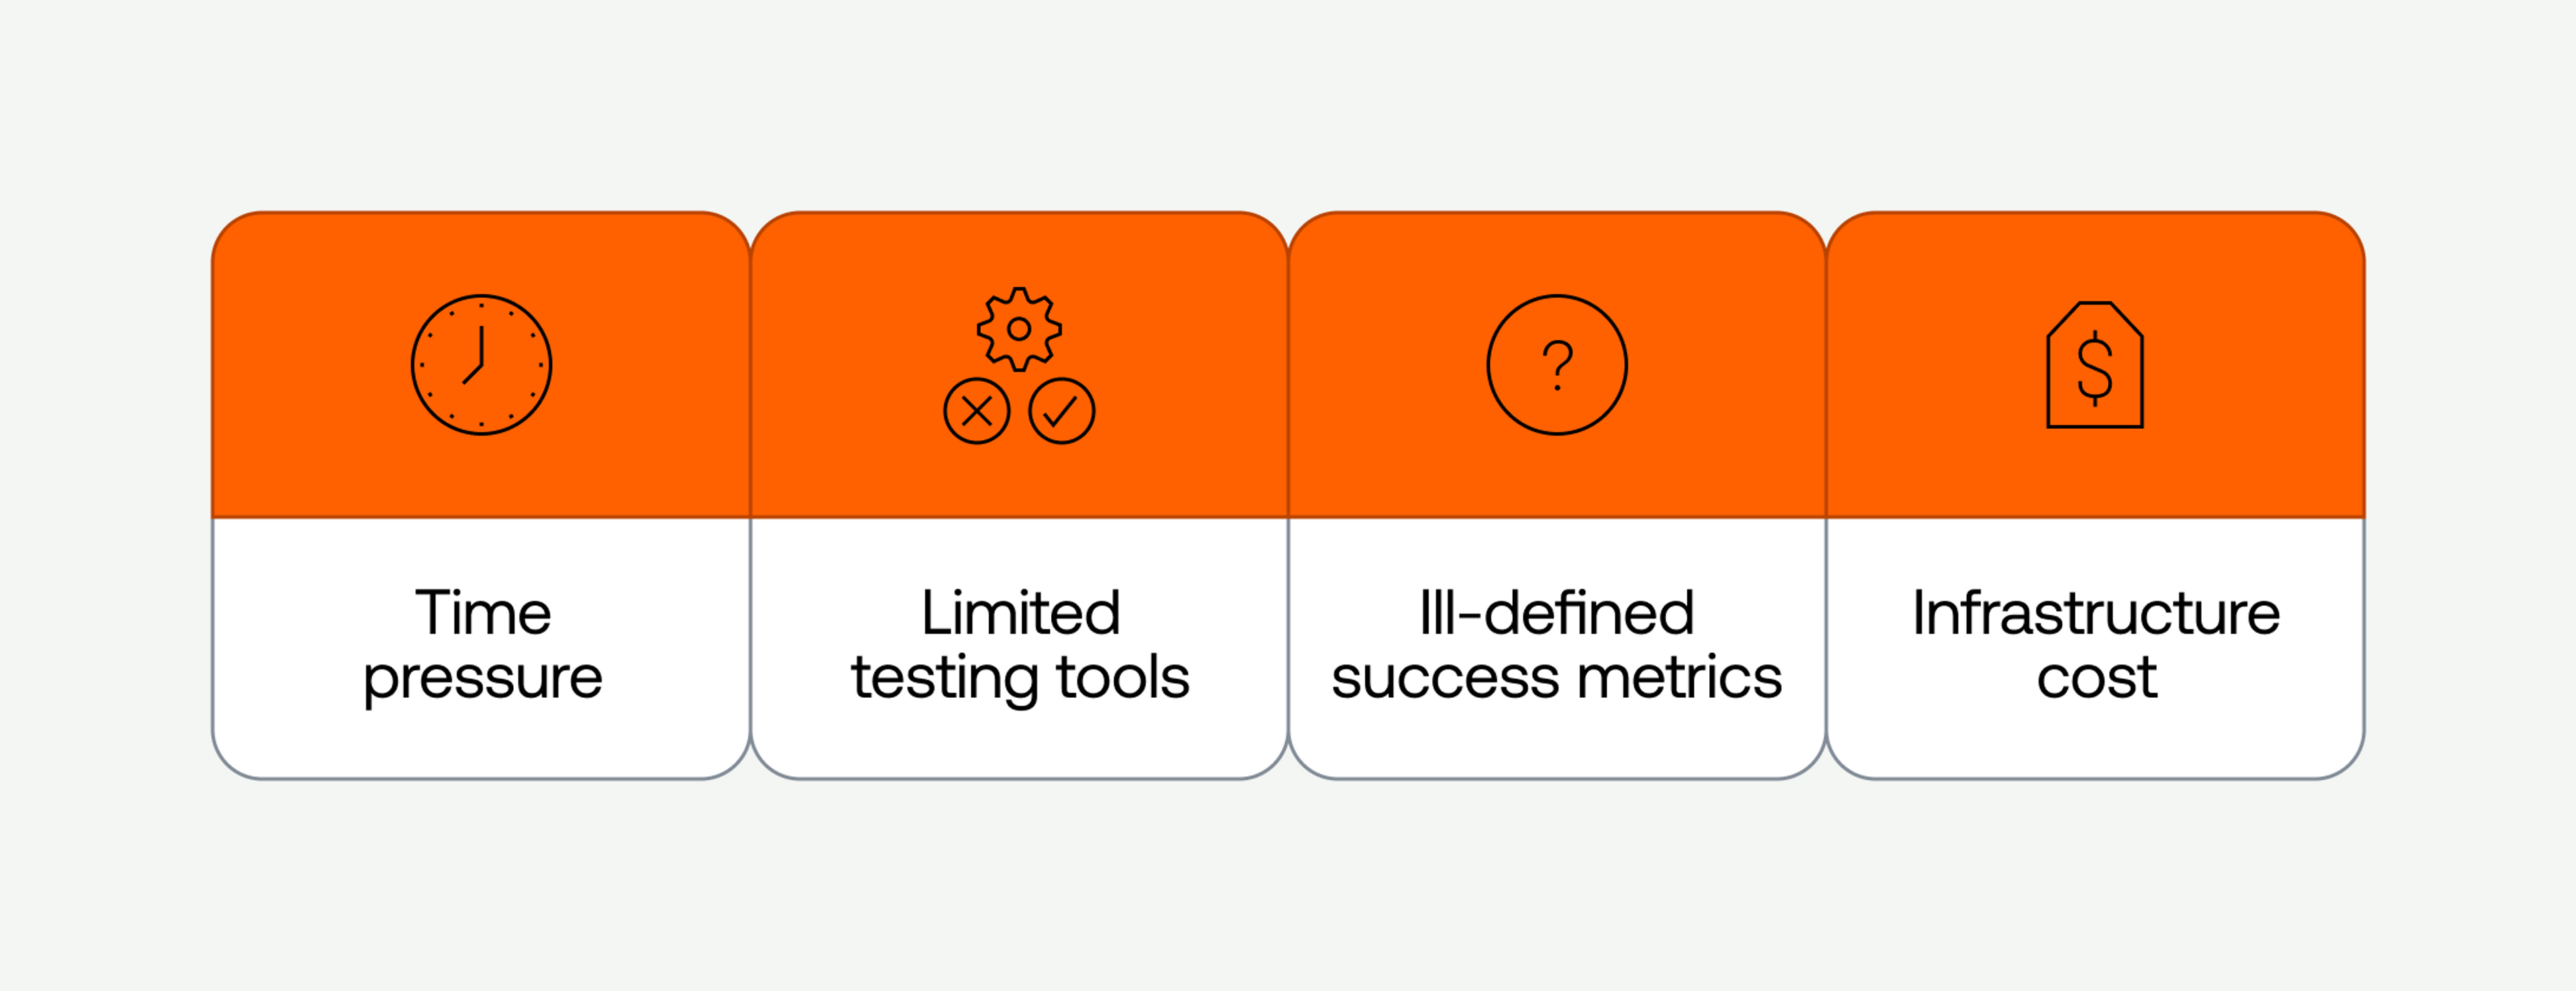 A graphic showing four challenges faced by the engineering team: time pressure, limited testing tools, ill-defined success metrics, and infrastructure cost